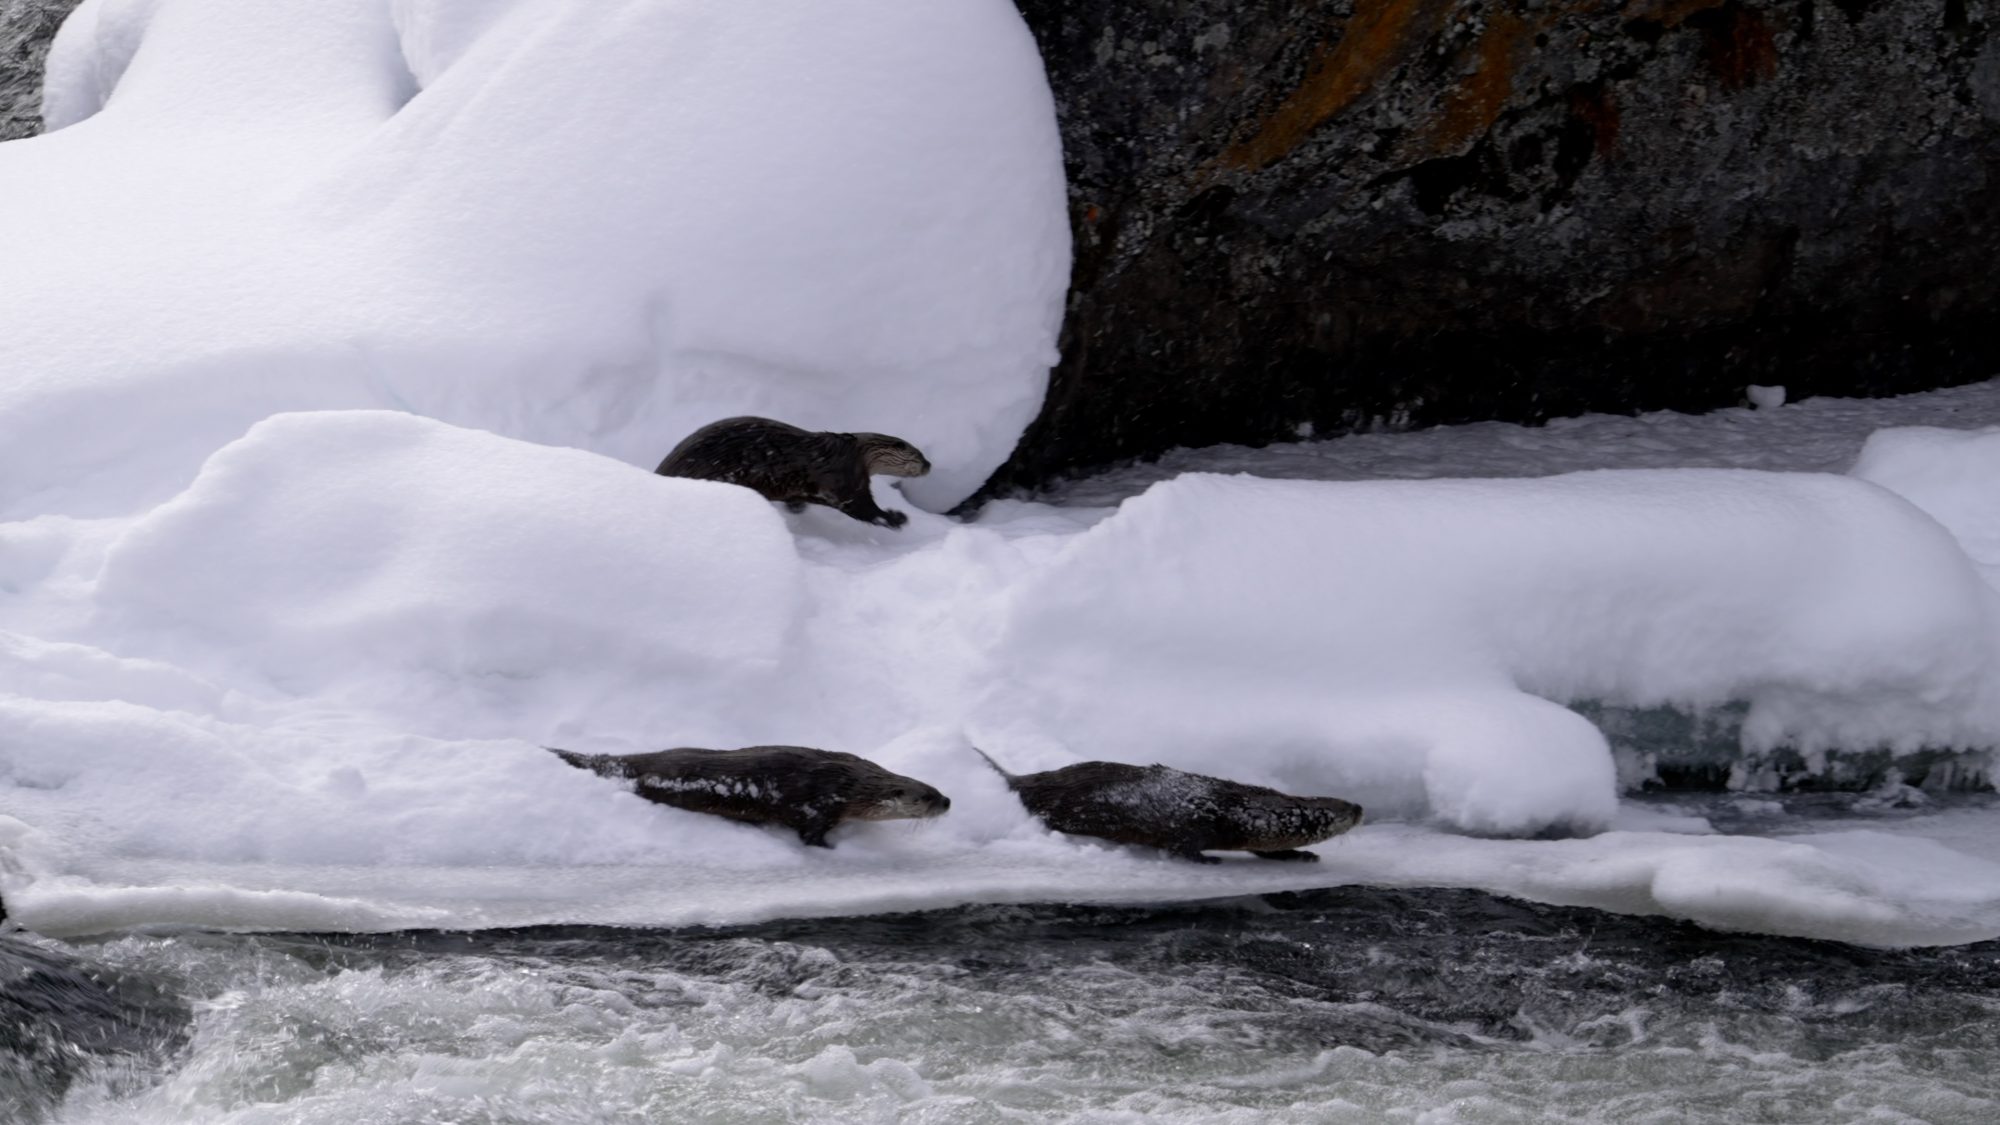 Otters playing on snow and ice – Yellowstone, USA 2023